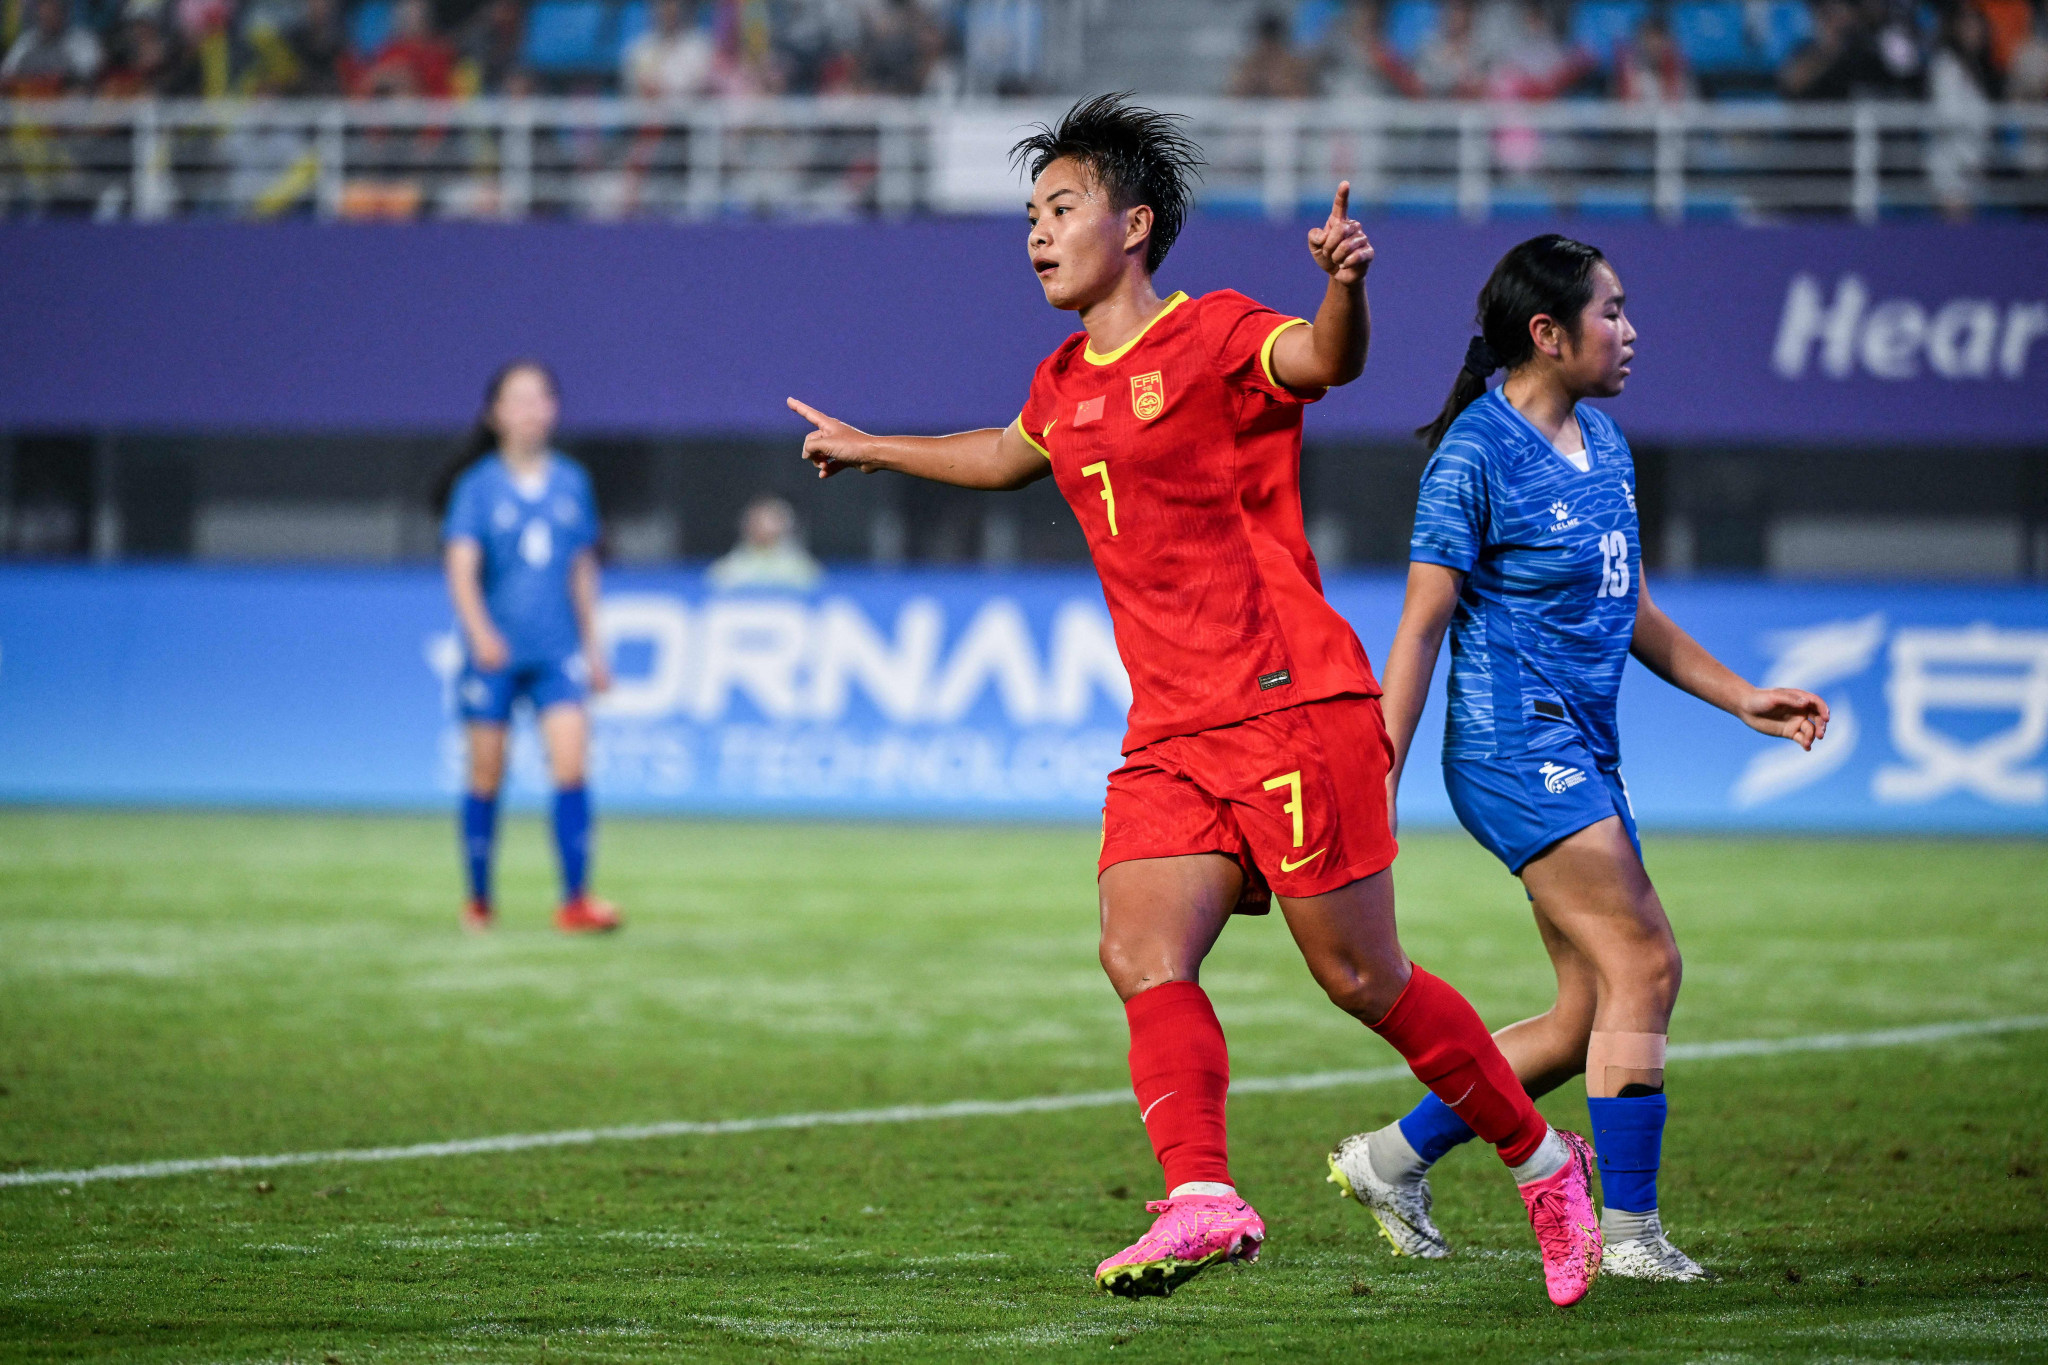 Wang Shuang was in lethal form as she scored four goals in the first half for the hosts ©Getty Images